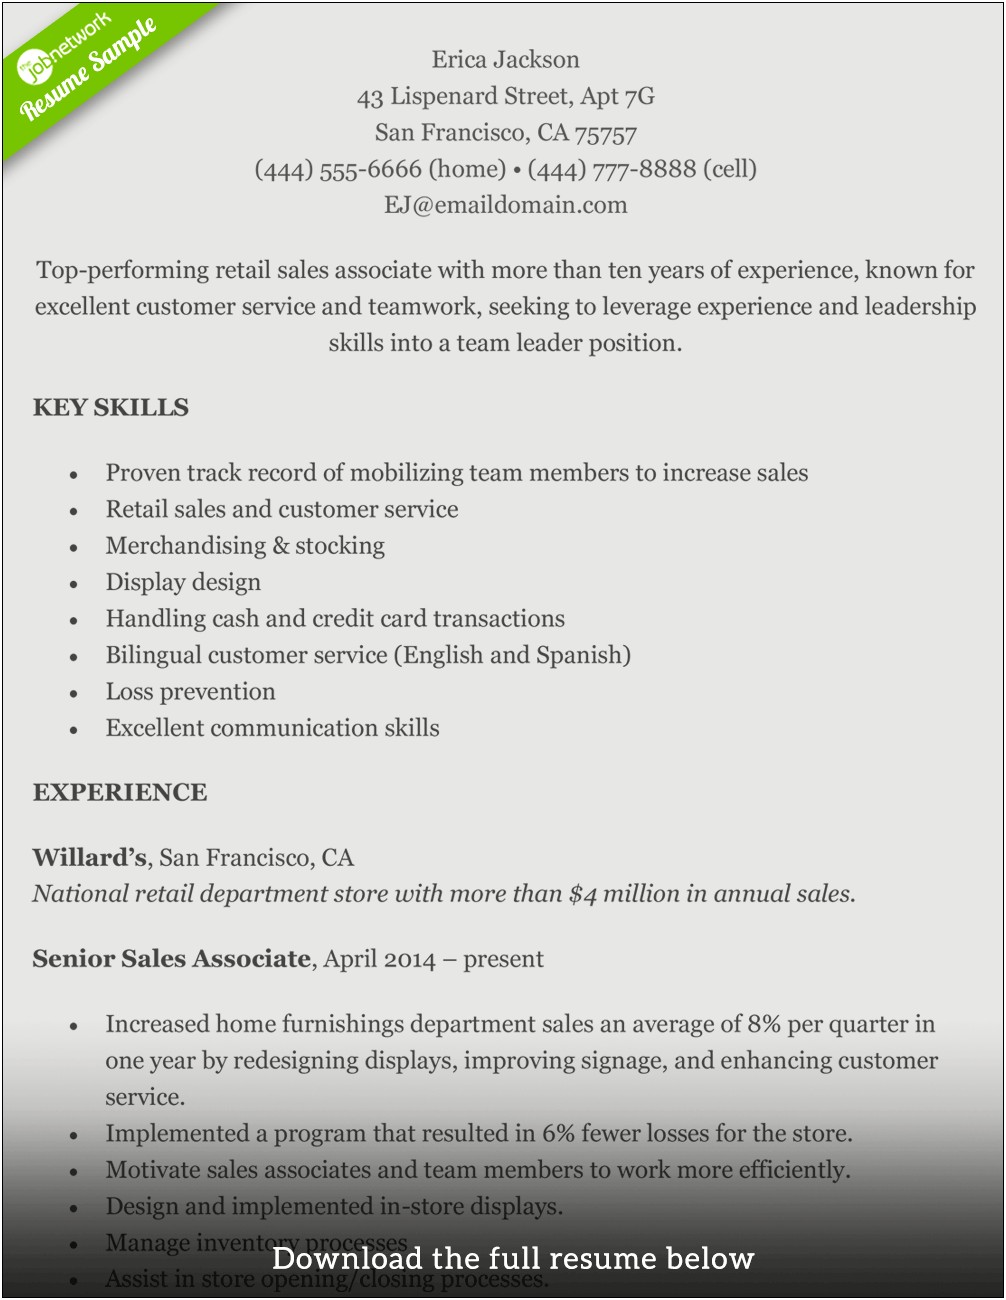 Sample Resume For High End Retail Position